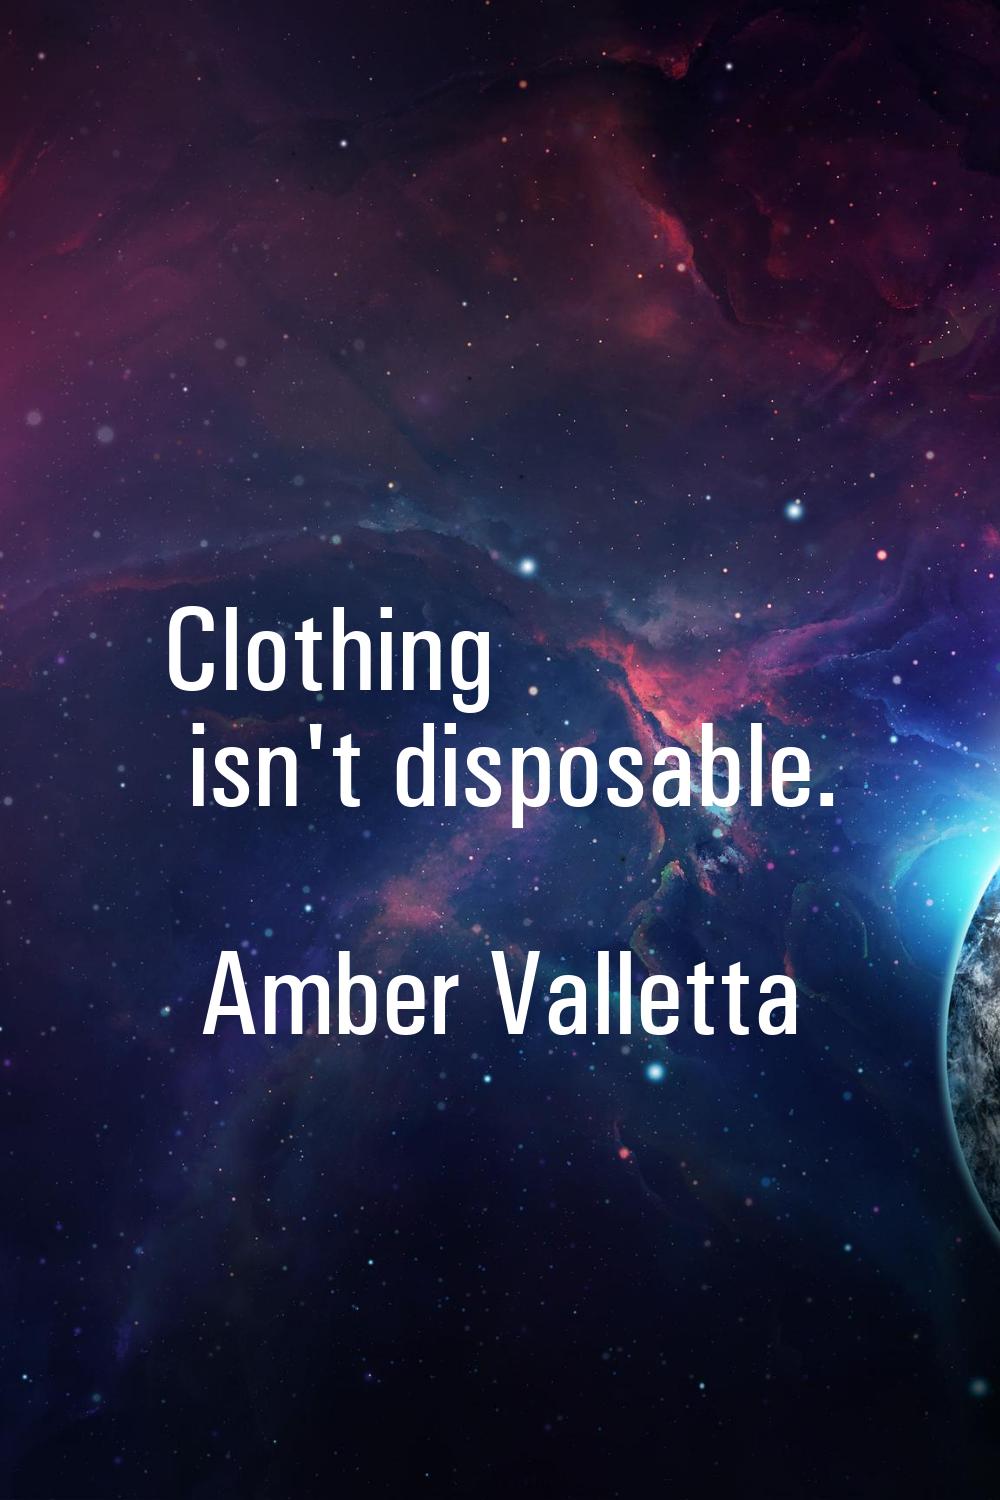 Clothing isn't disposable.